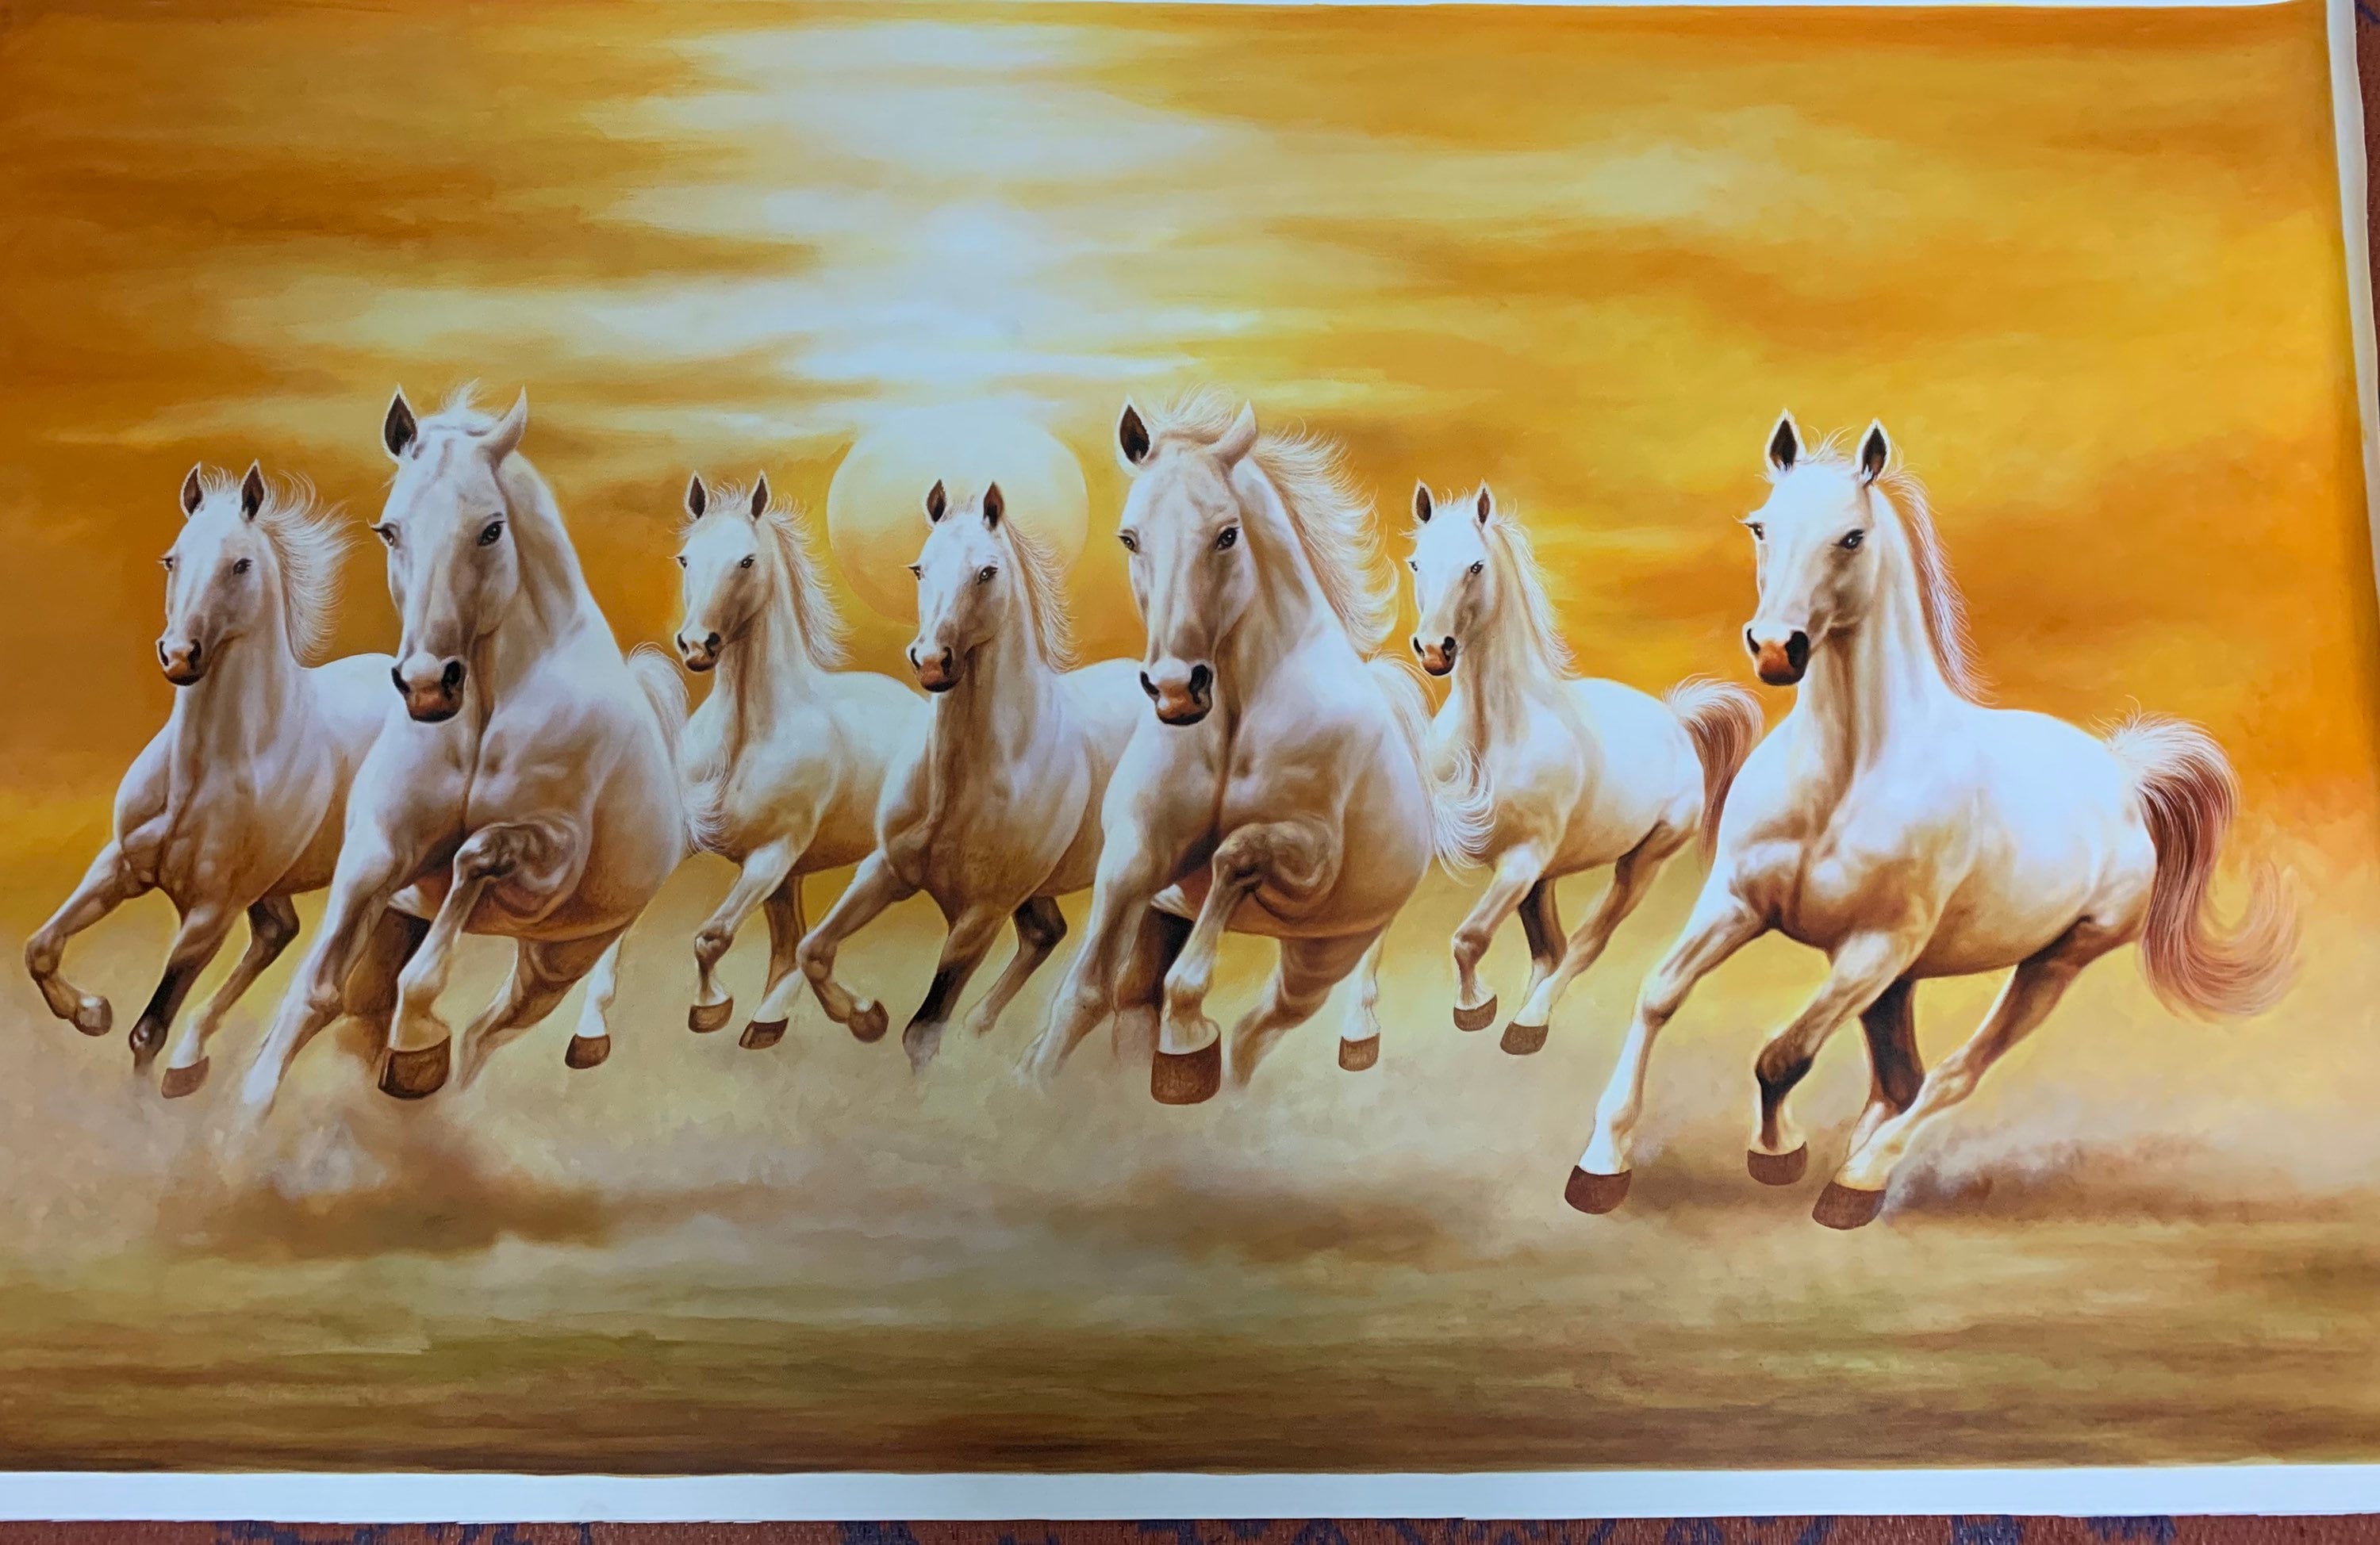 7 Running Horses Painting Vastu: Direction, Importance and Significance